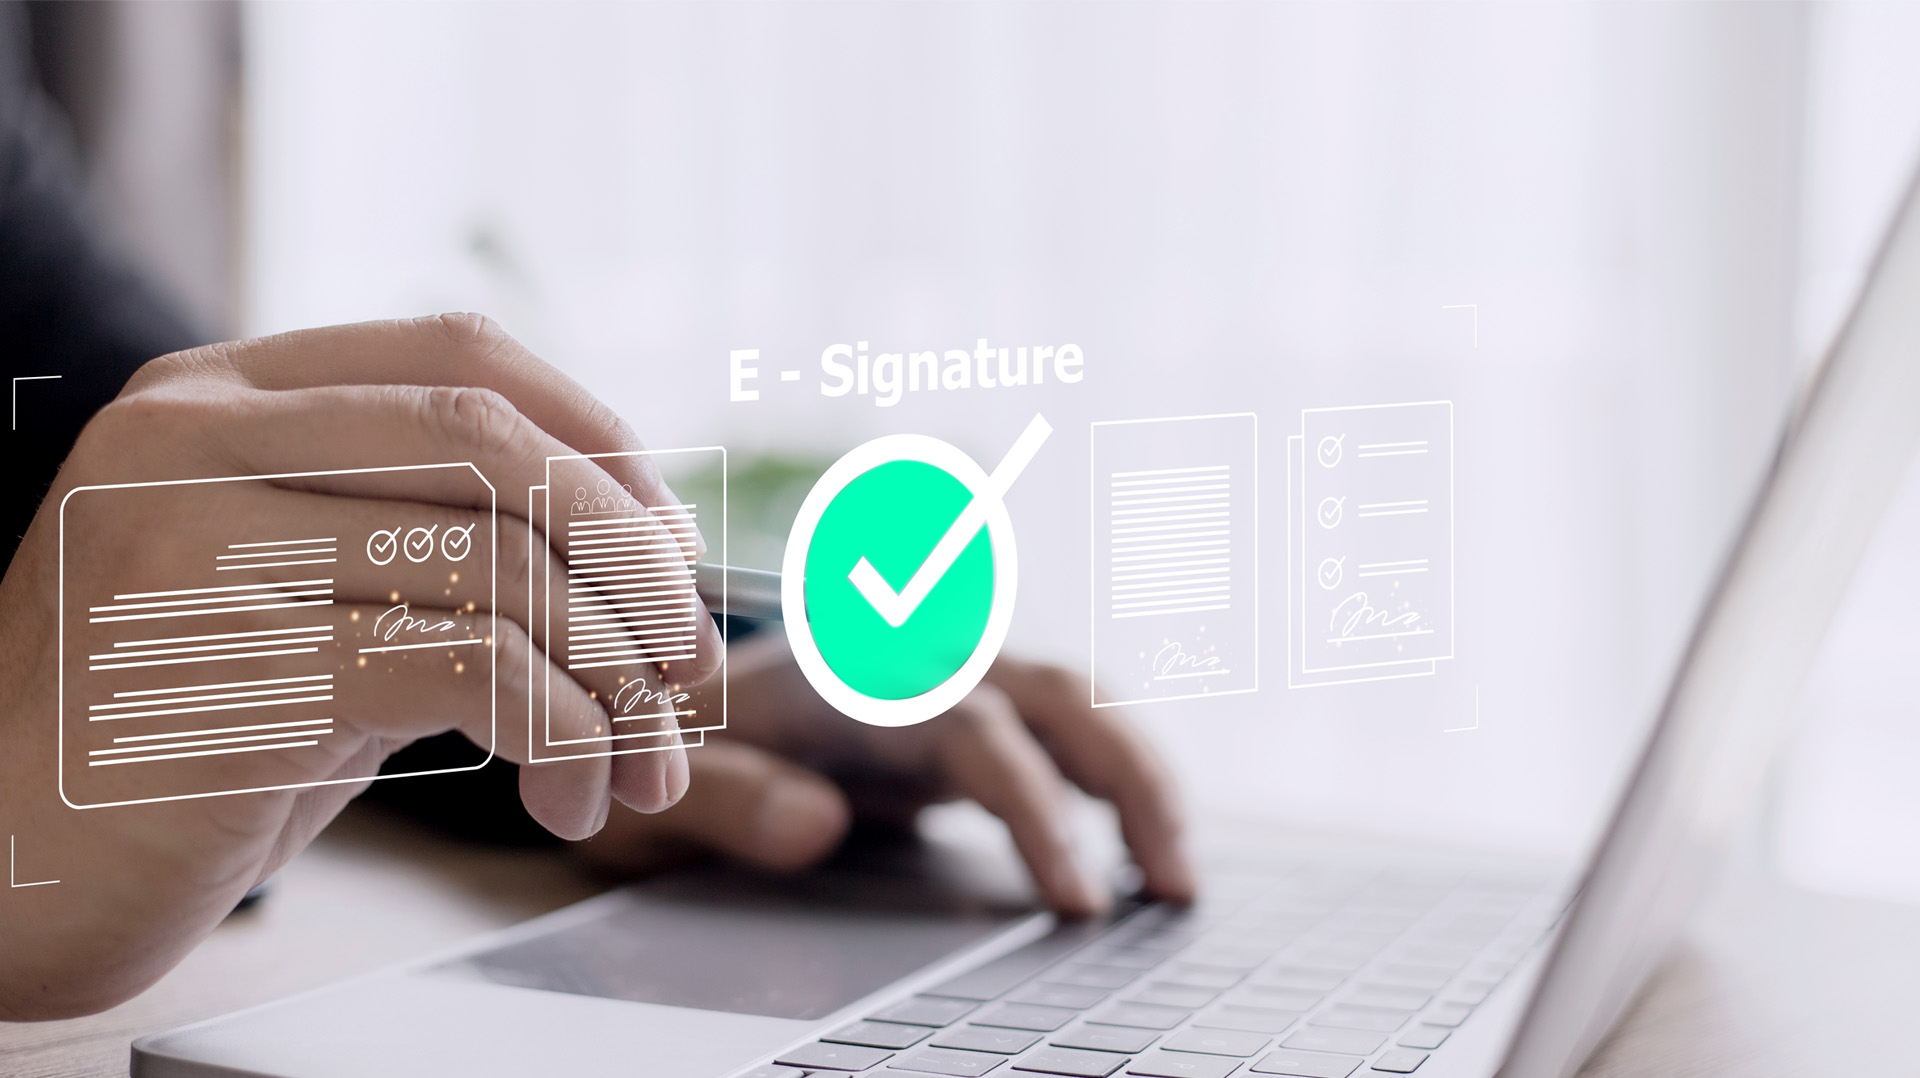 Impacts of Digital Signatures on Employment Contract